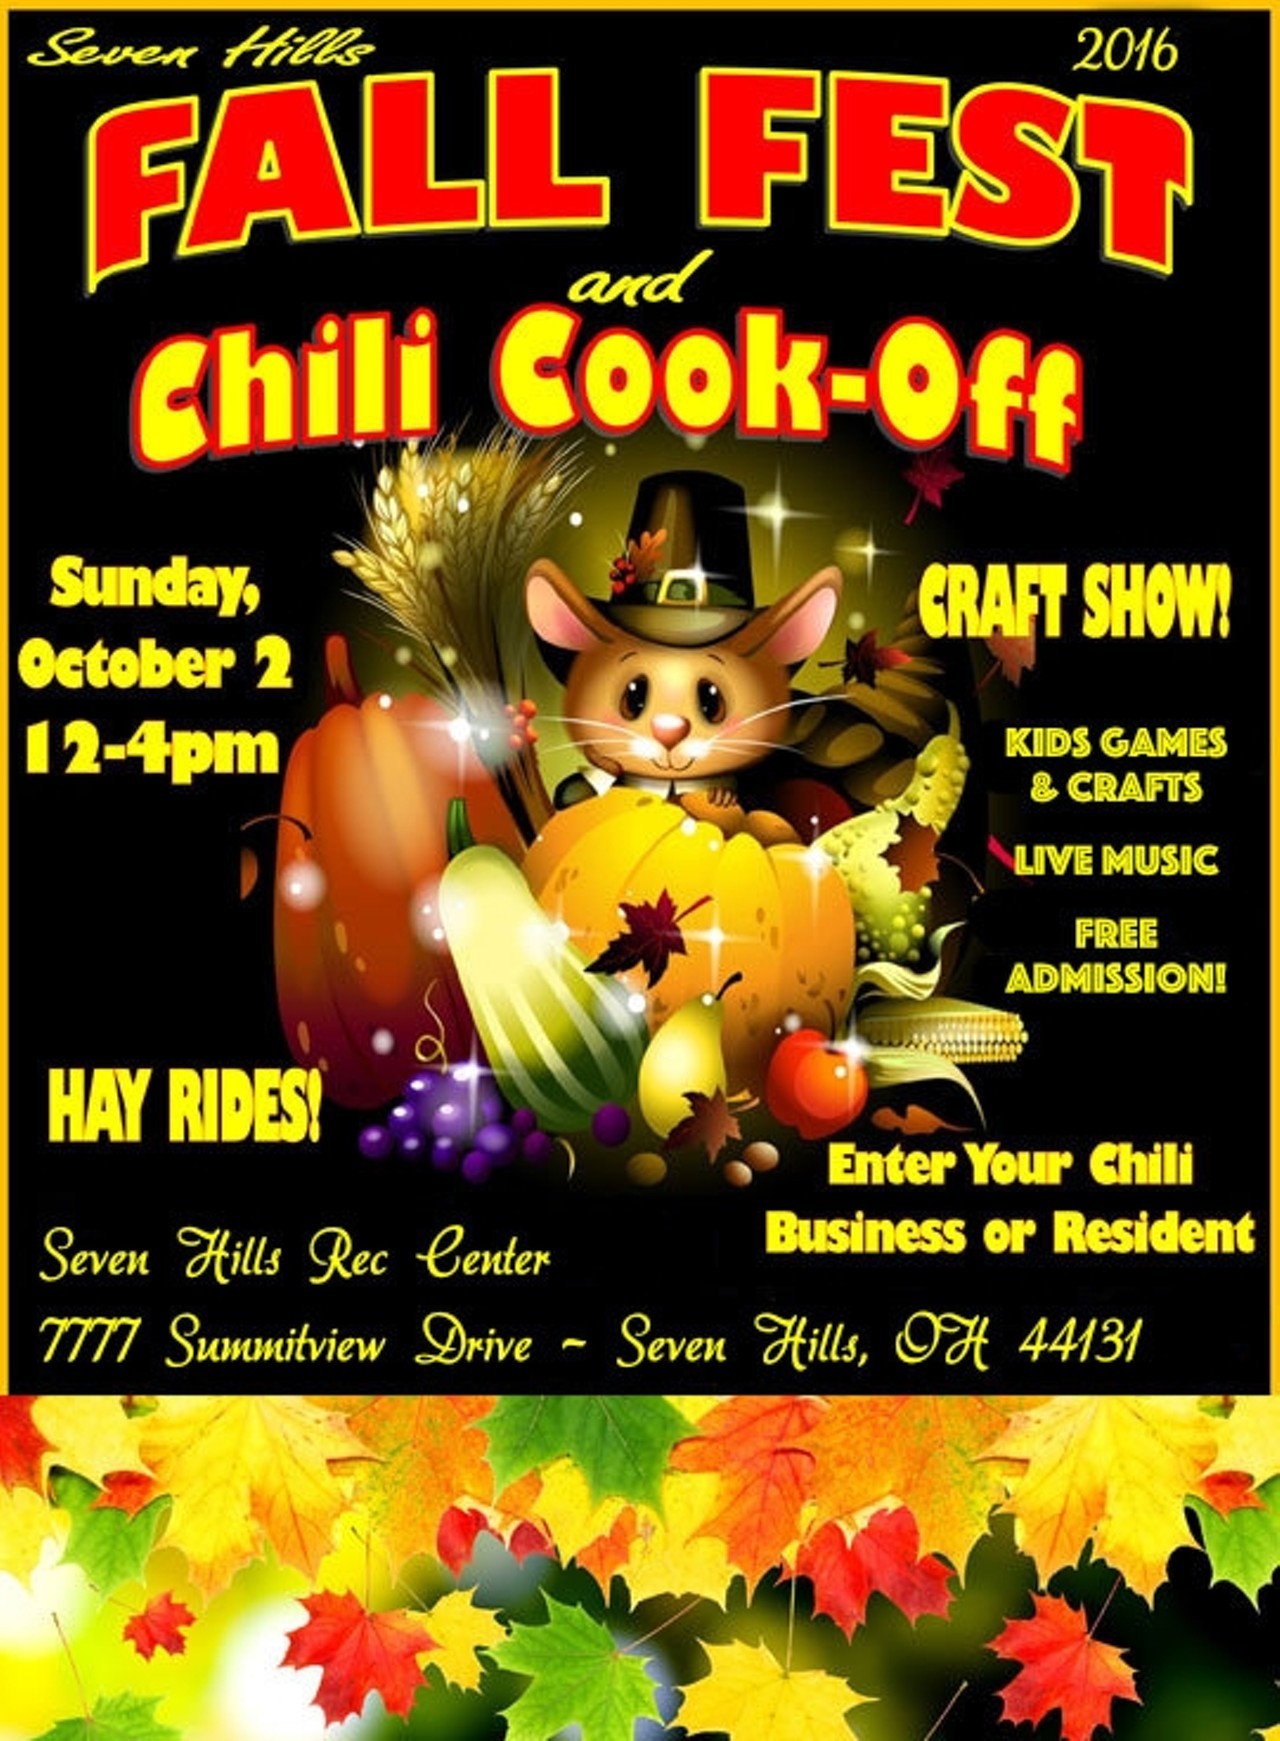 Seven Hills Fall Festival, Chili Cook Off & Craft Show  When: Sun., Oct. 2, 12-4 p.m.  Phone: 216-570-8201  Email: northcoastpromo@hotmail.com  Price: Free Seven Hills Chili Fest & Craft Fair Free Admission! 12-4pm Family fun festival with a chili competition benefitting the Salvation Army. Family activities include hay rides for the kids, pumpkin decorating & face painting. Inside the recreation center is a craft show featuring up to 75 craft booths with fall d&eacute;cor. Cider & Donuts for sale too!